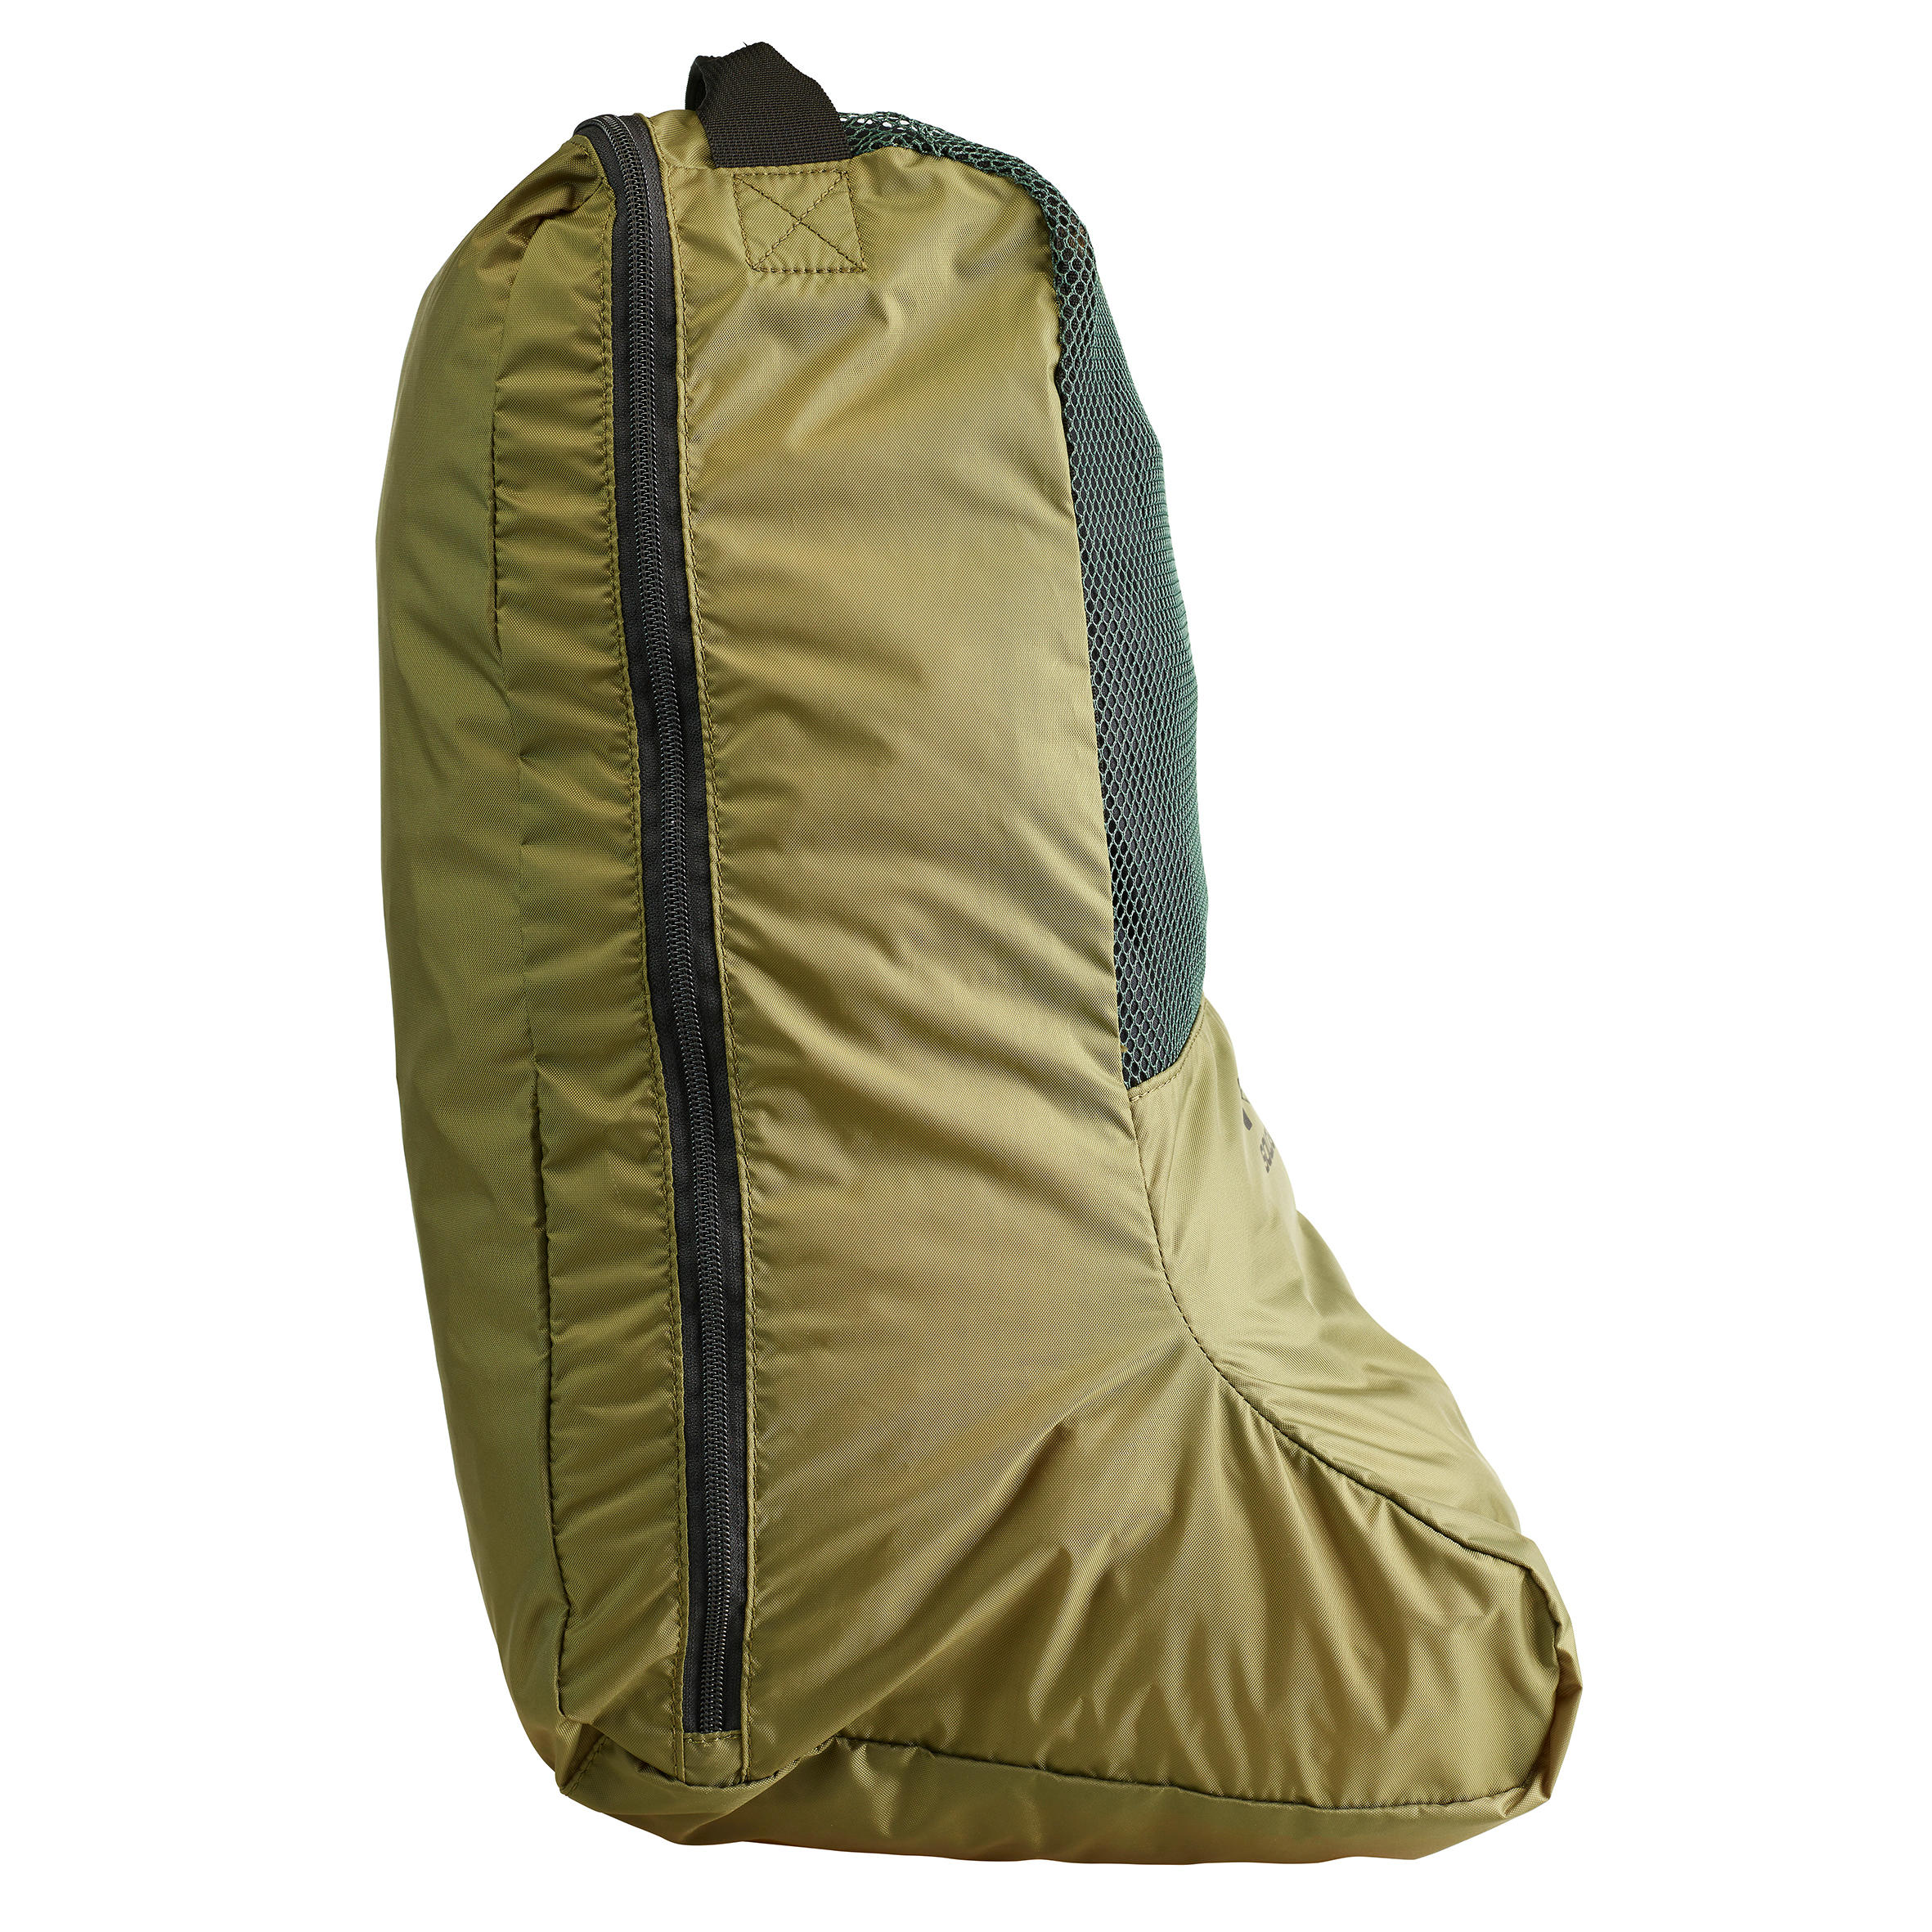 Quick-Drying Welly Boot Bag - Green 2/3